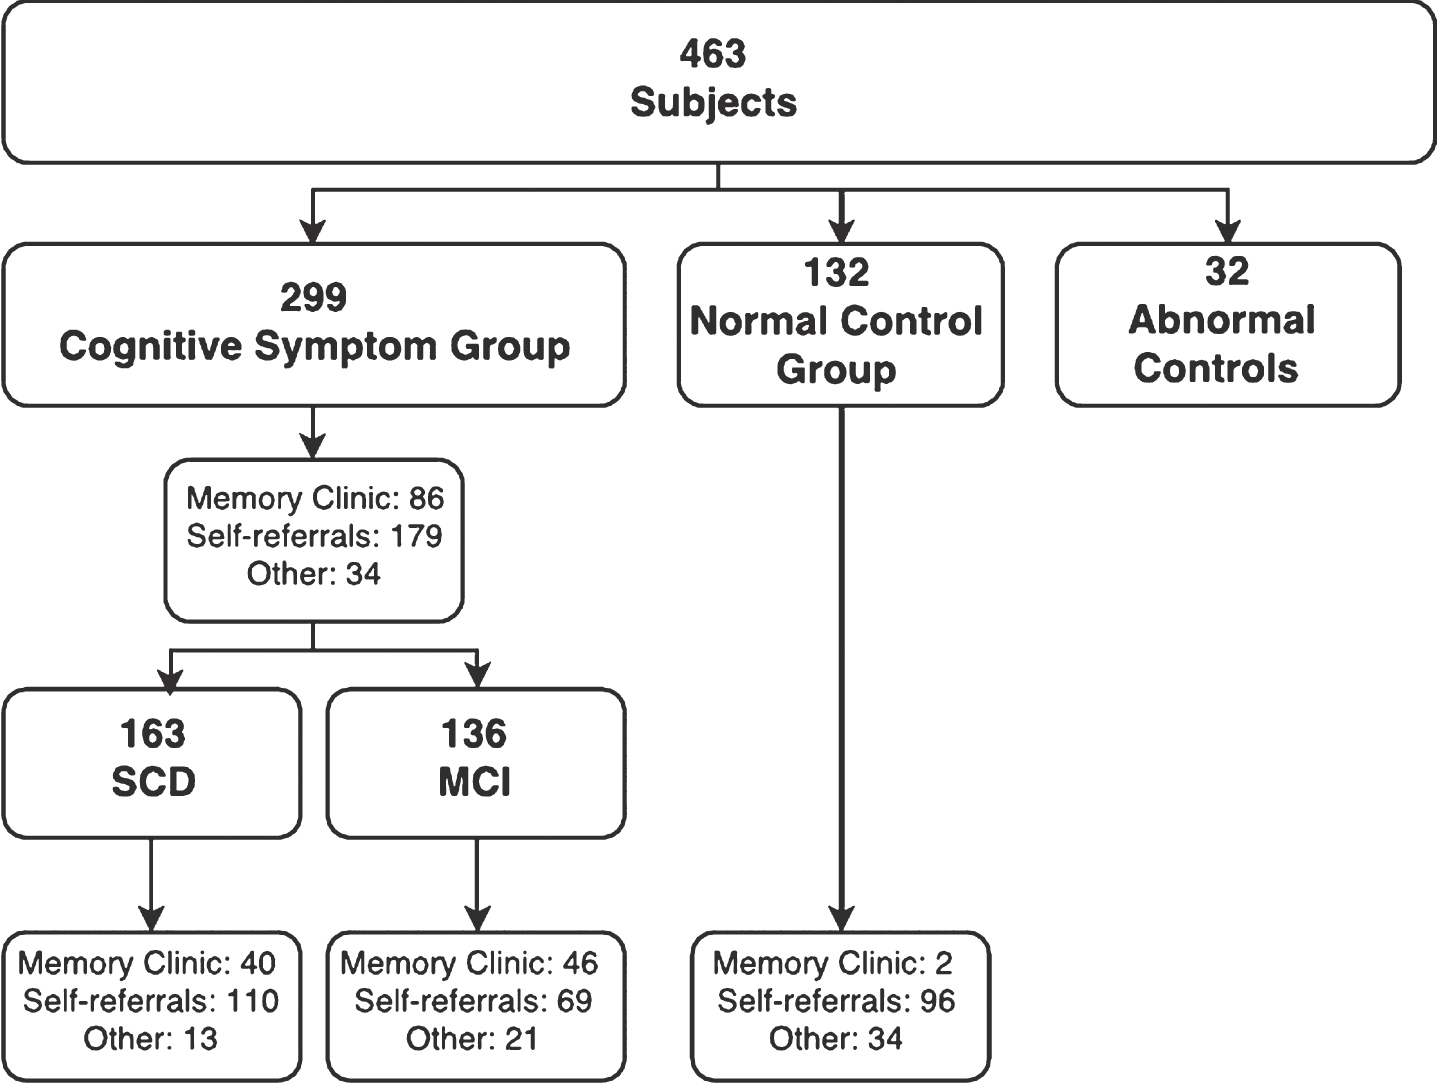 A total of 463 participants were classified according to disease stage at the time of analysis, whereof 32 recruited as controls showed abnormal cognitive performance and were excluded from analysis. Participants were classified as belonging to a normal control group or cognitive symptom group (SCD and MCI), and their characteristics analyzed depending on recruitment source.